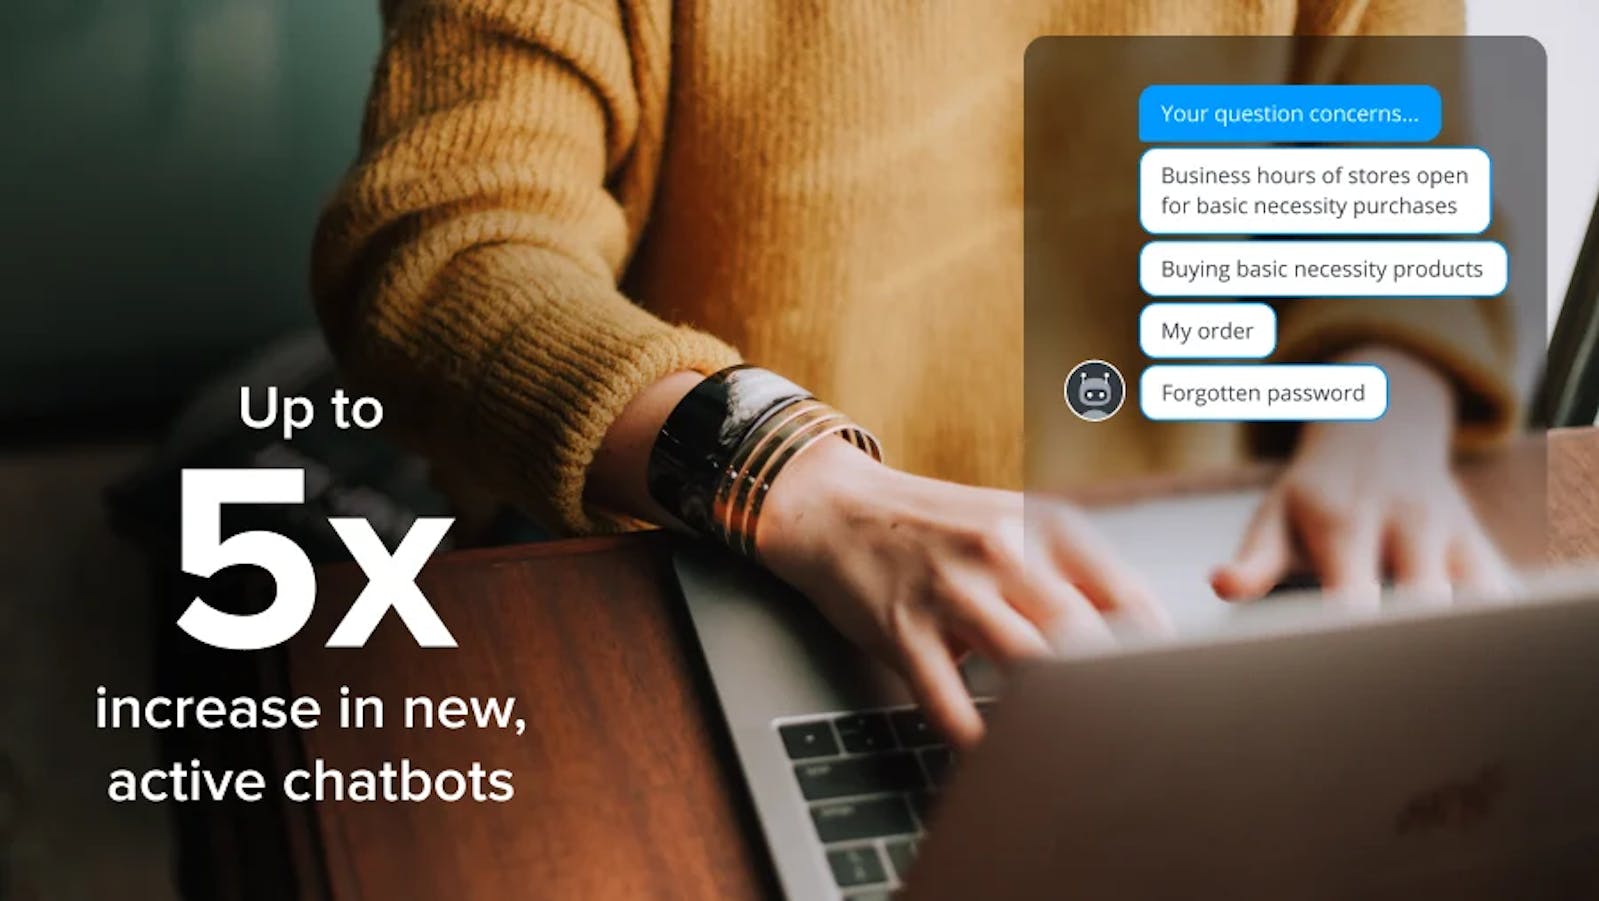  Featured image: Chatbots: How can the automation of online conversations provide efficient solutions for maintaining customer service during times of crisis? - Read full post: Chatbots: How can the automation of online conversations provide efficient solutions for maintaining customer service during times of crisis?